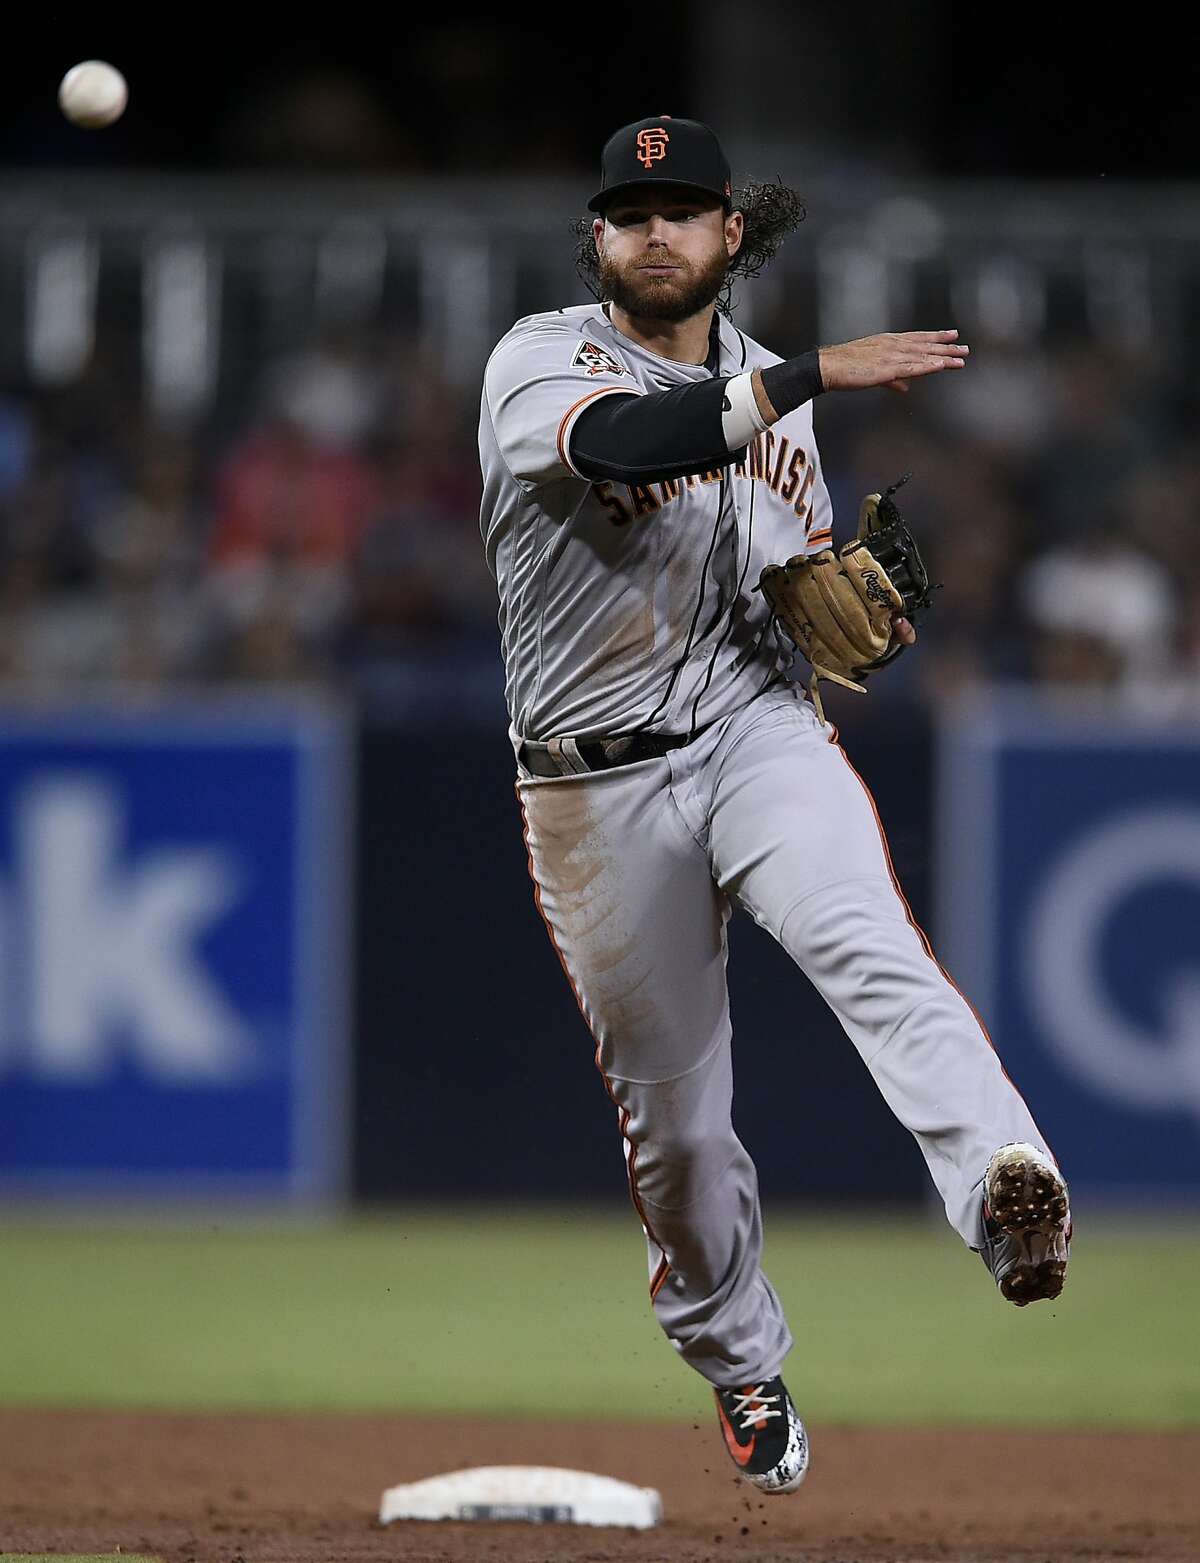 San Francisco Giants shortstop Brandon Crawford throws to first to force out San Diego Padres' Franchy Cordero during the third inning of a baseball game in San Diego, Friday, April 13, 2018. (AP Photo/Kelvin Kuo)